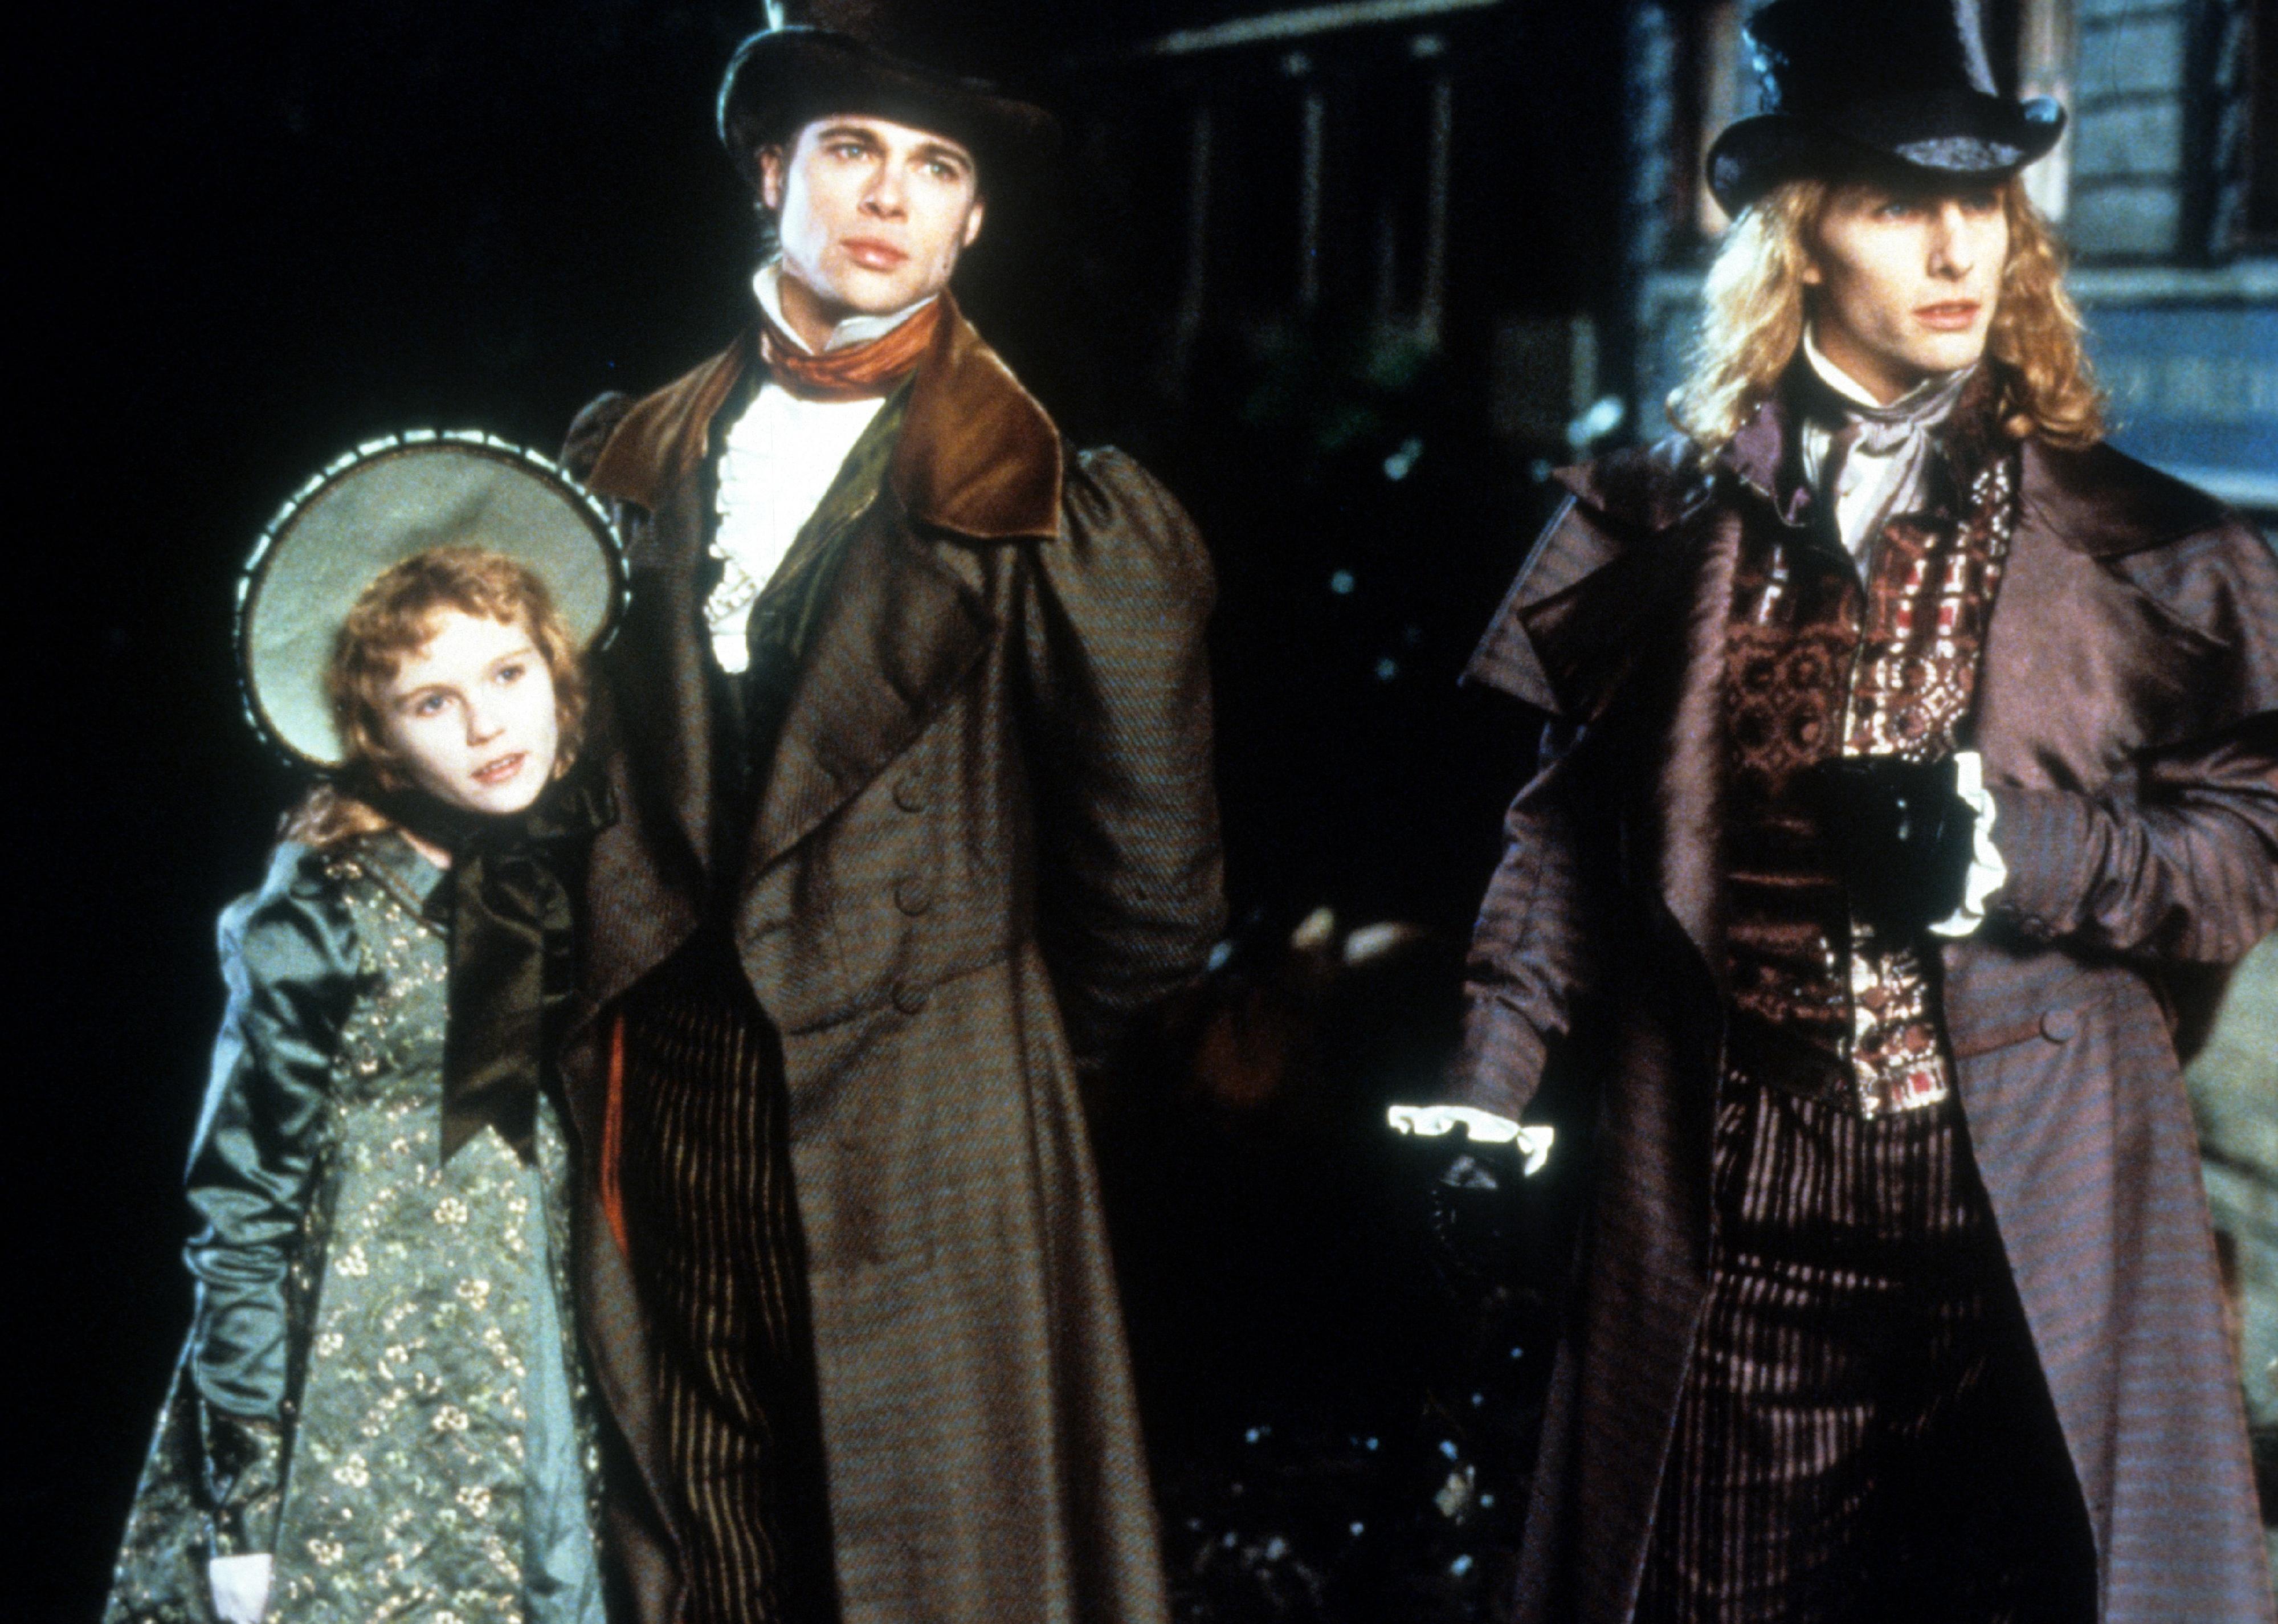 Brad Pitt, Tom Cruise, and Kirsten Dunst in late 1800